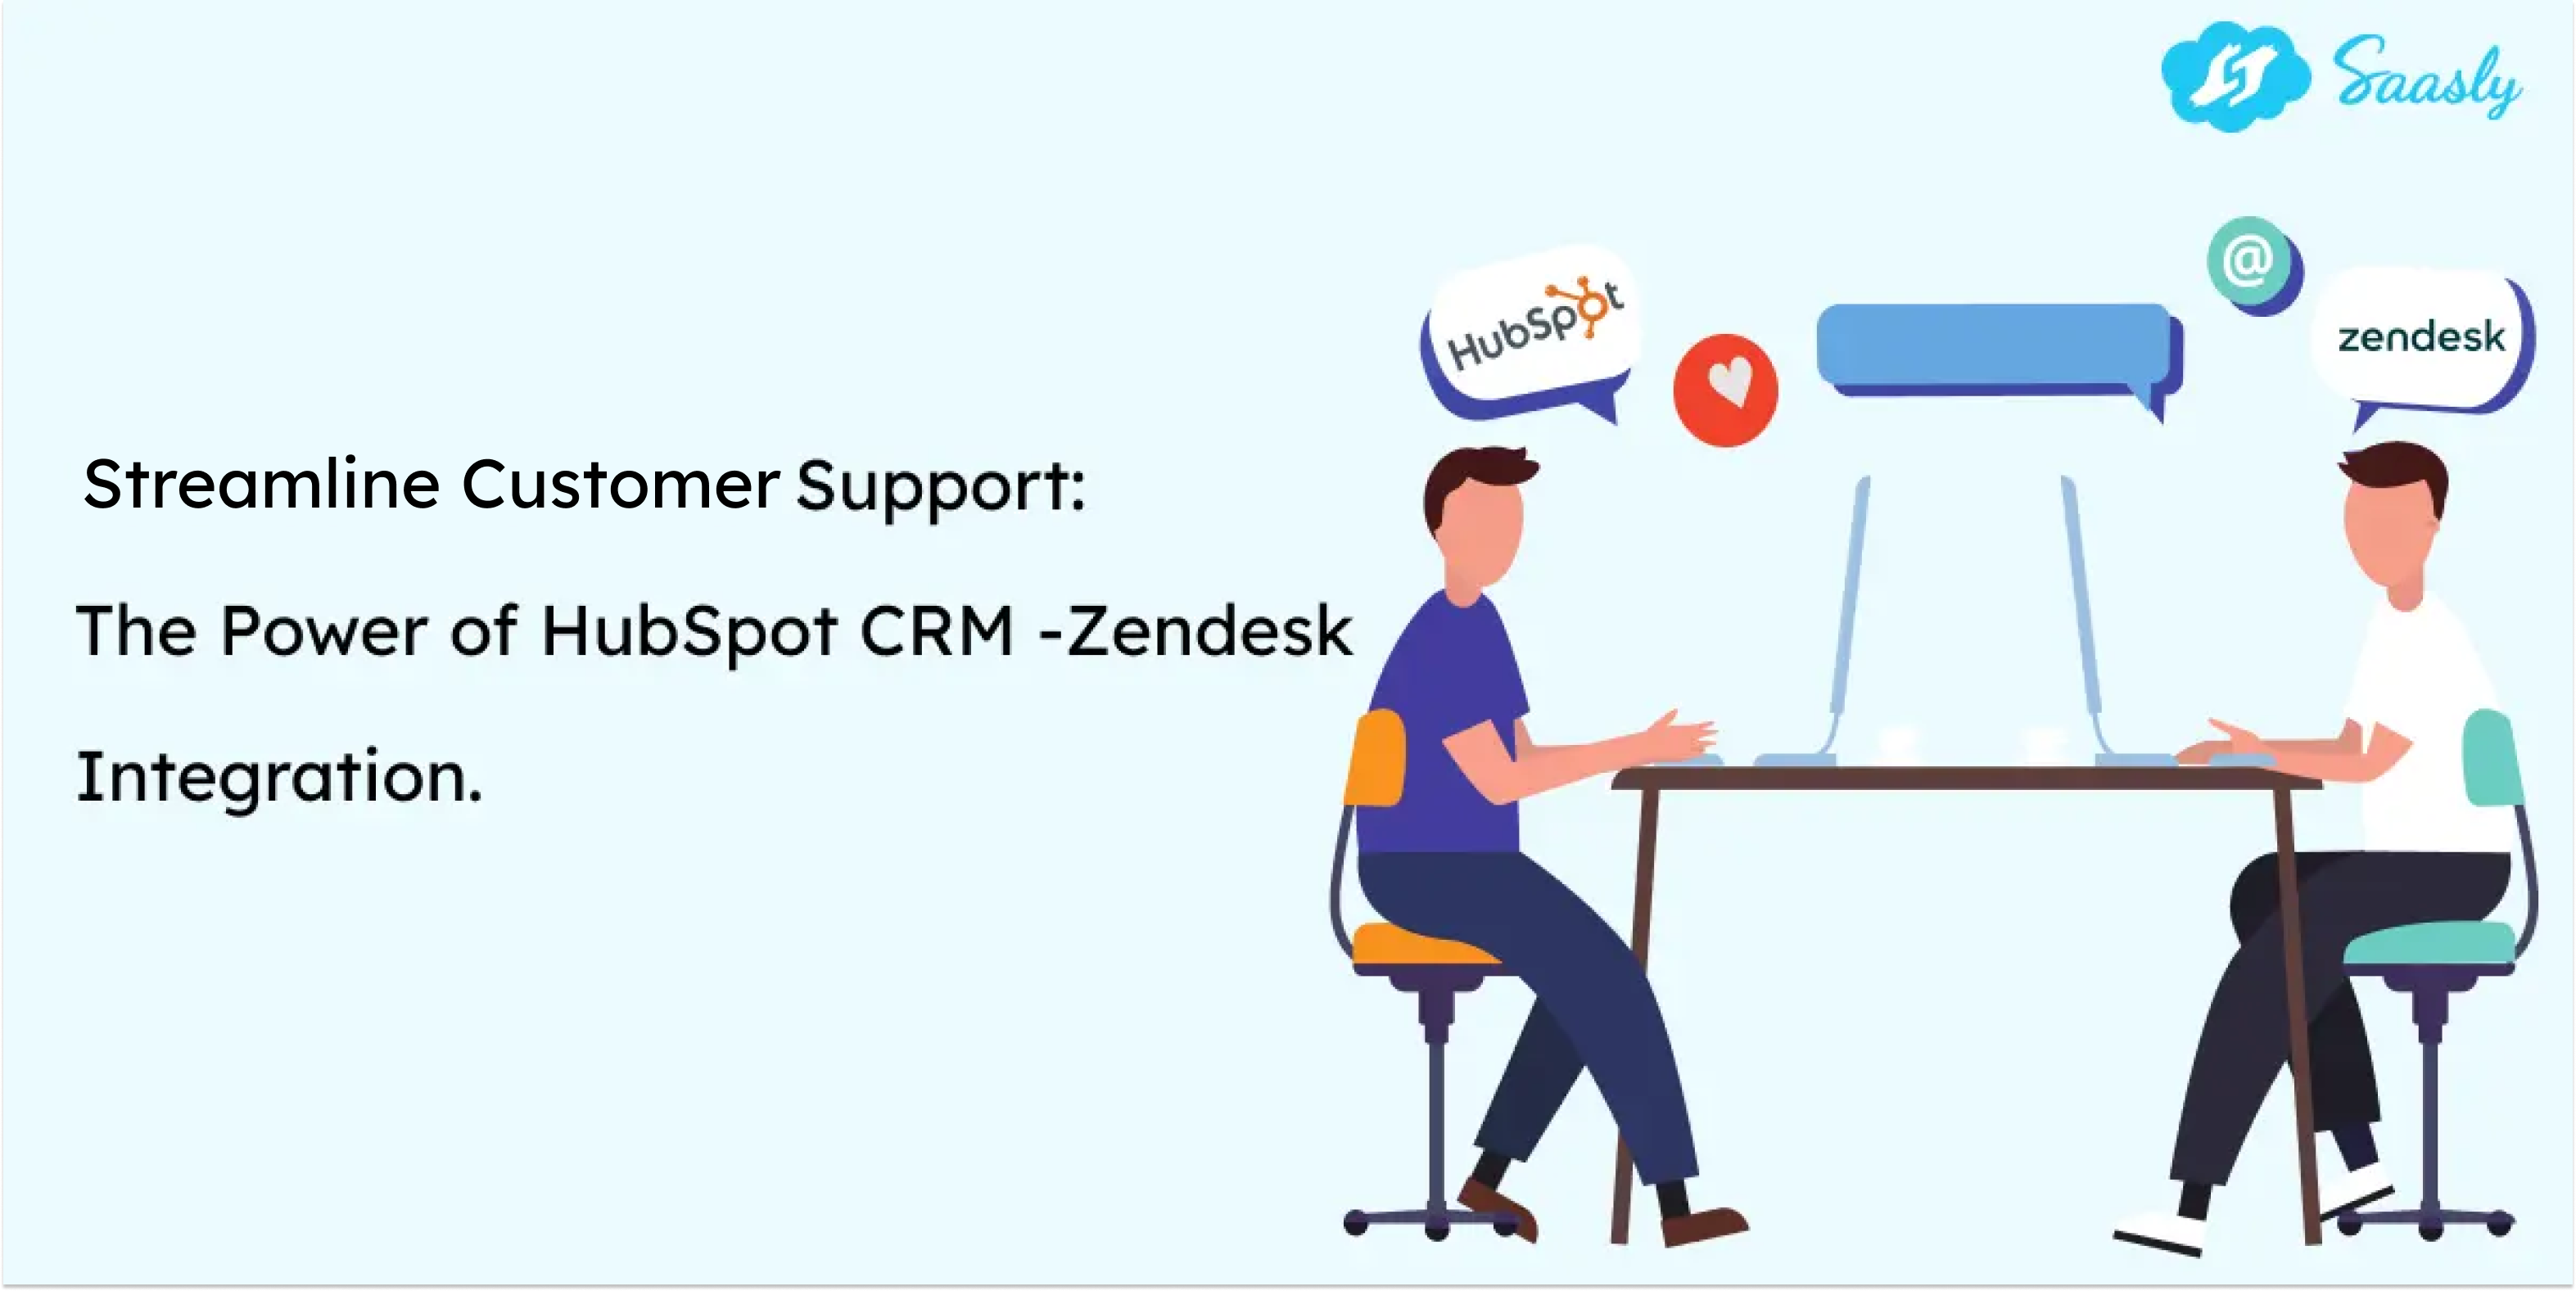 Don't toggle between HubSpot and Zendesk; instead, harness the power of the HubSpot CRM-Zendesk Integration App.